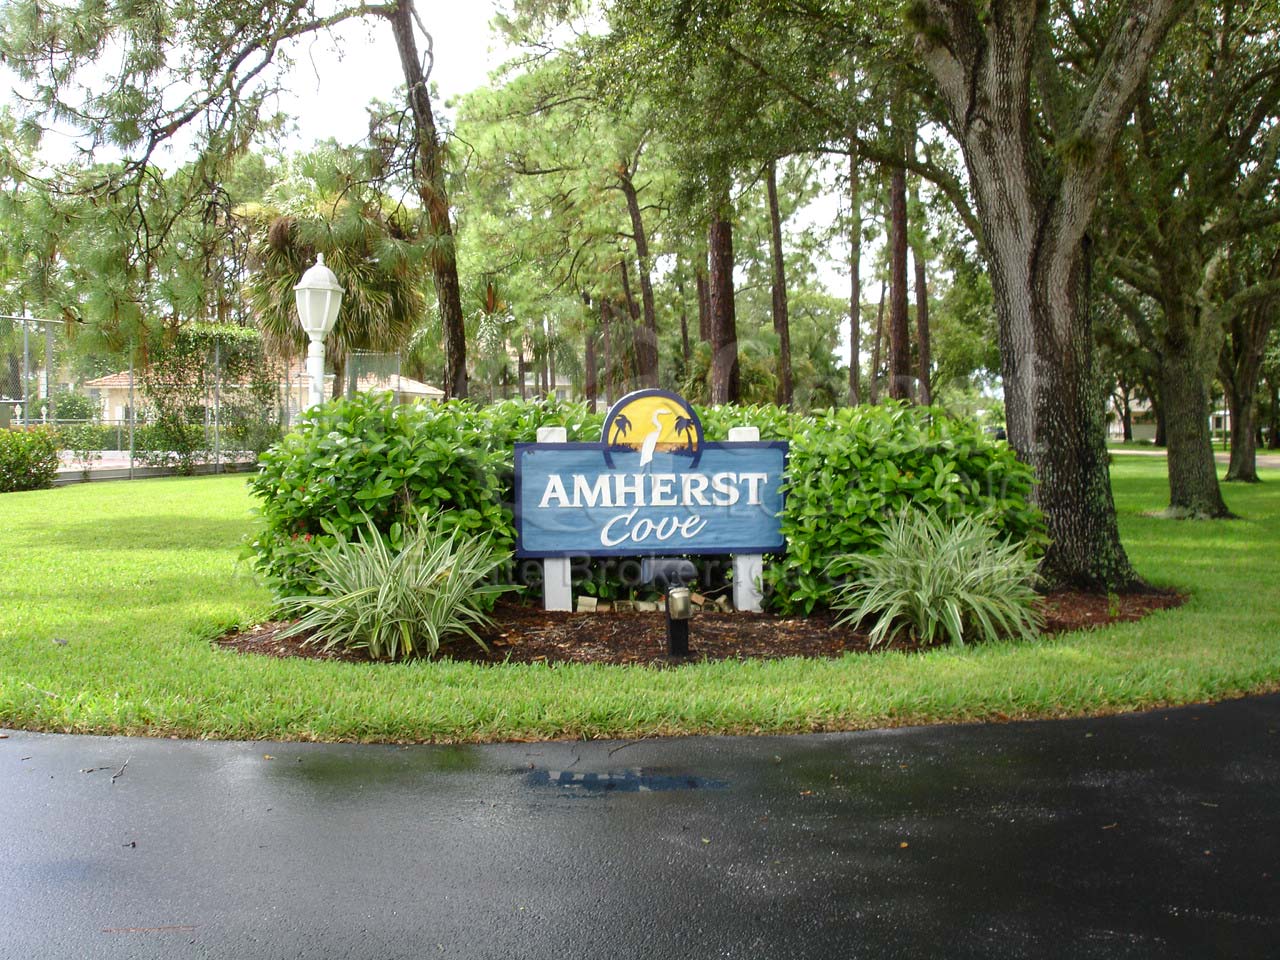 Amherst Cove entrance